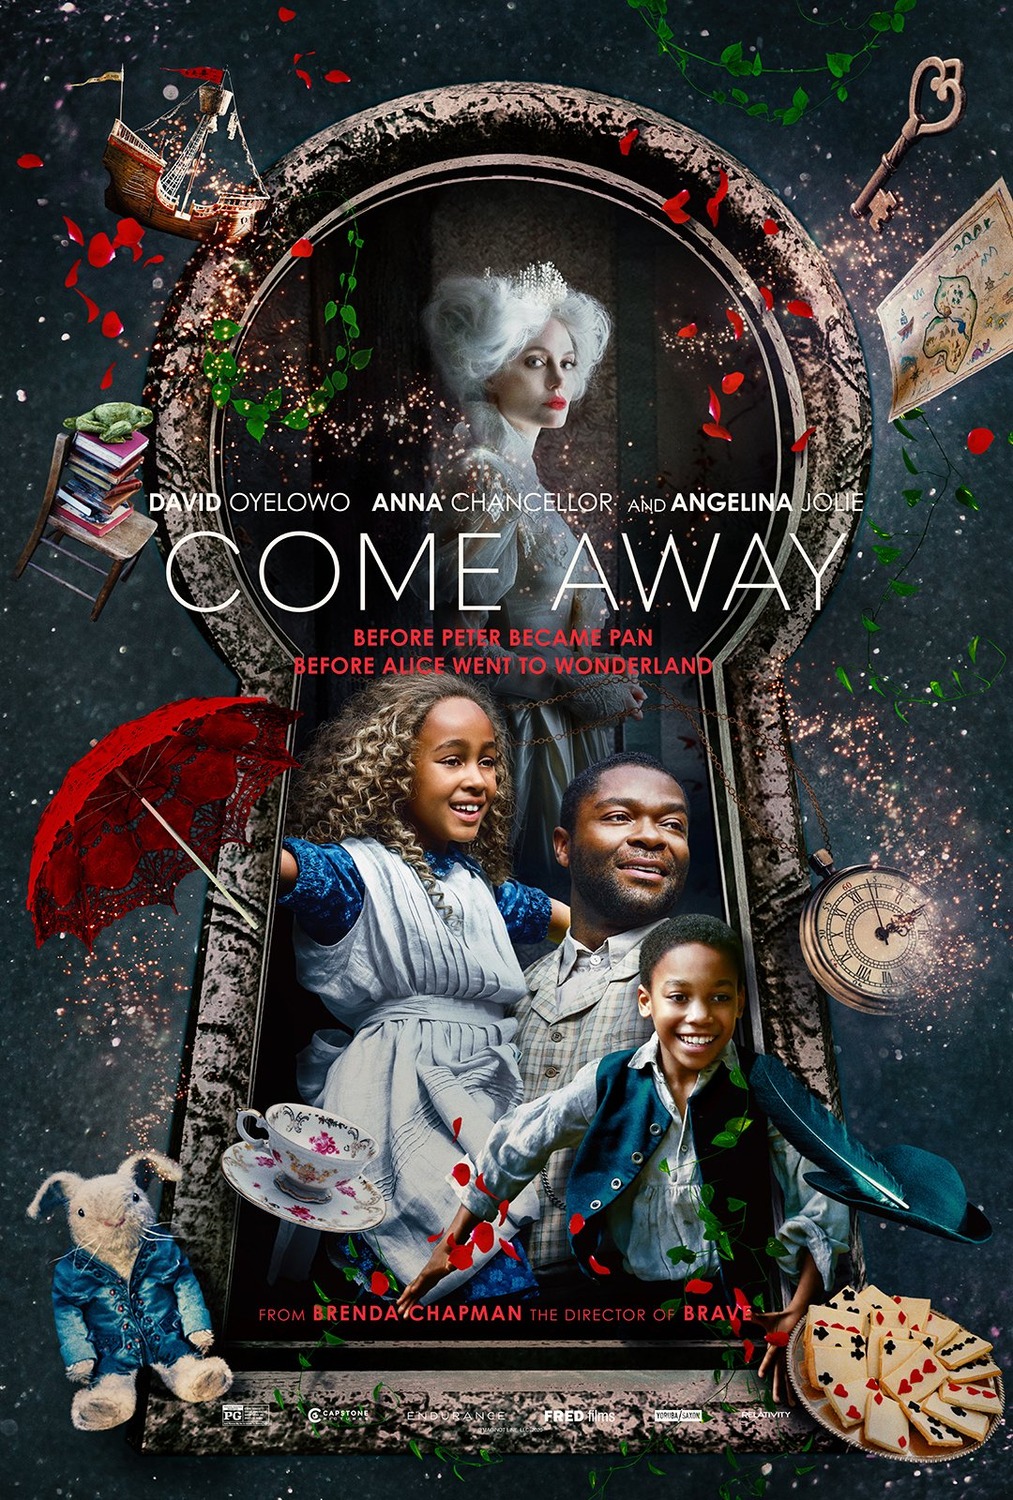 Come Away -A Tale Of Two Tales